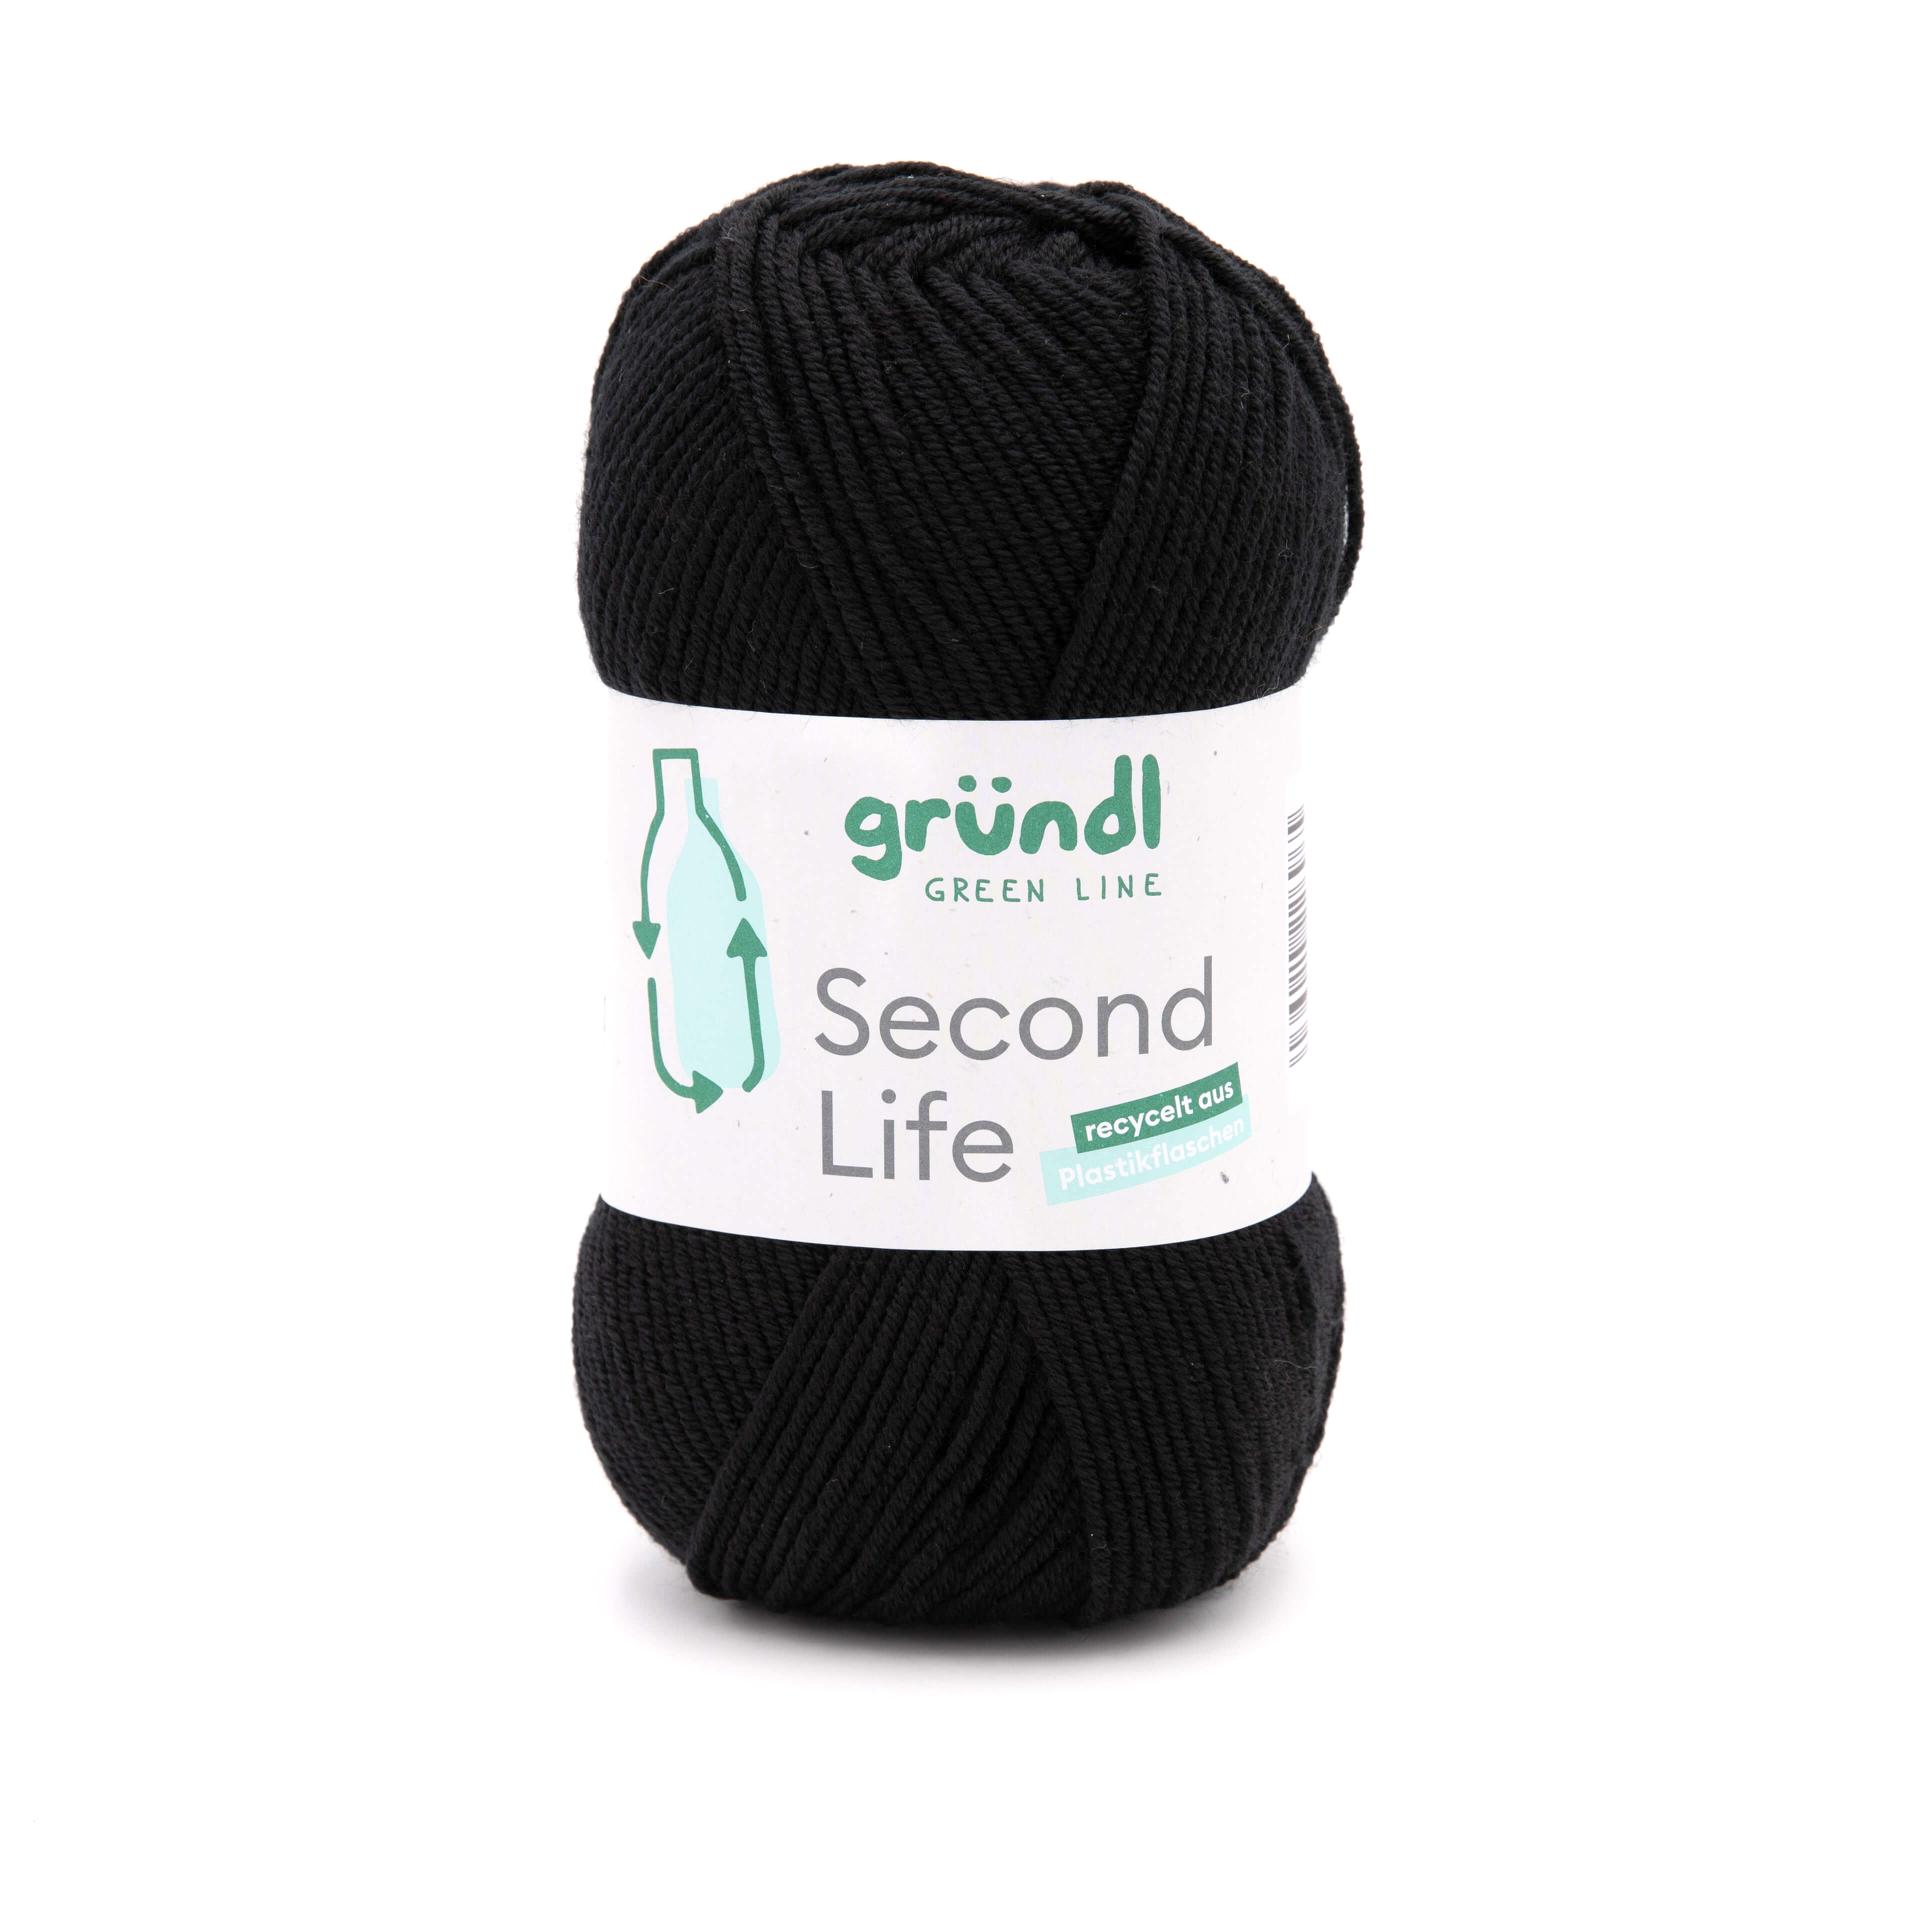 Second Life - Recyclingwolle, 100g/260m